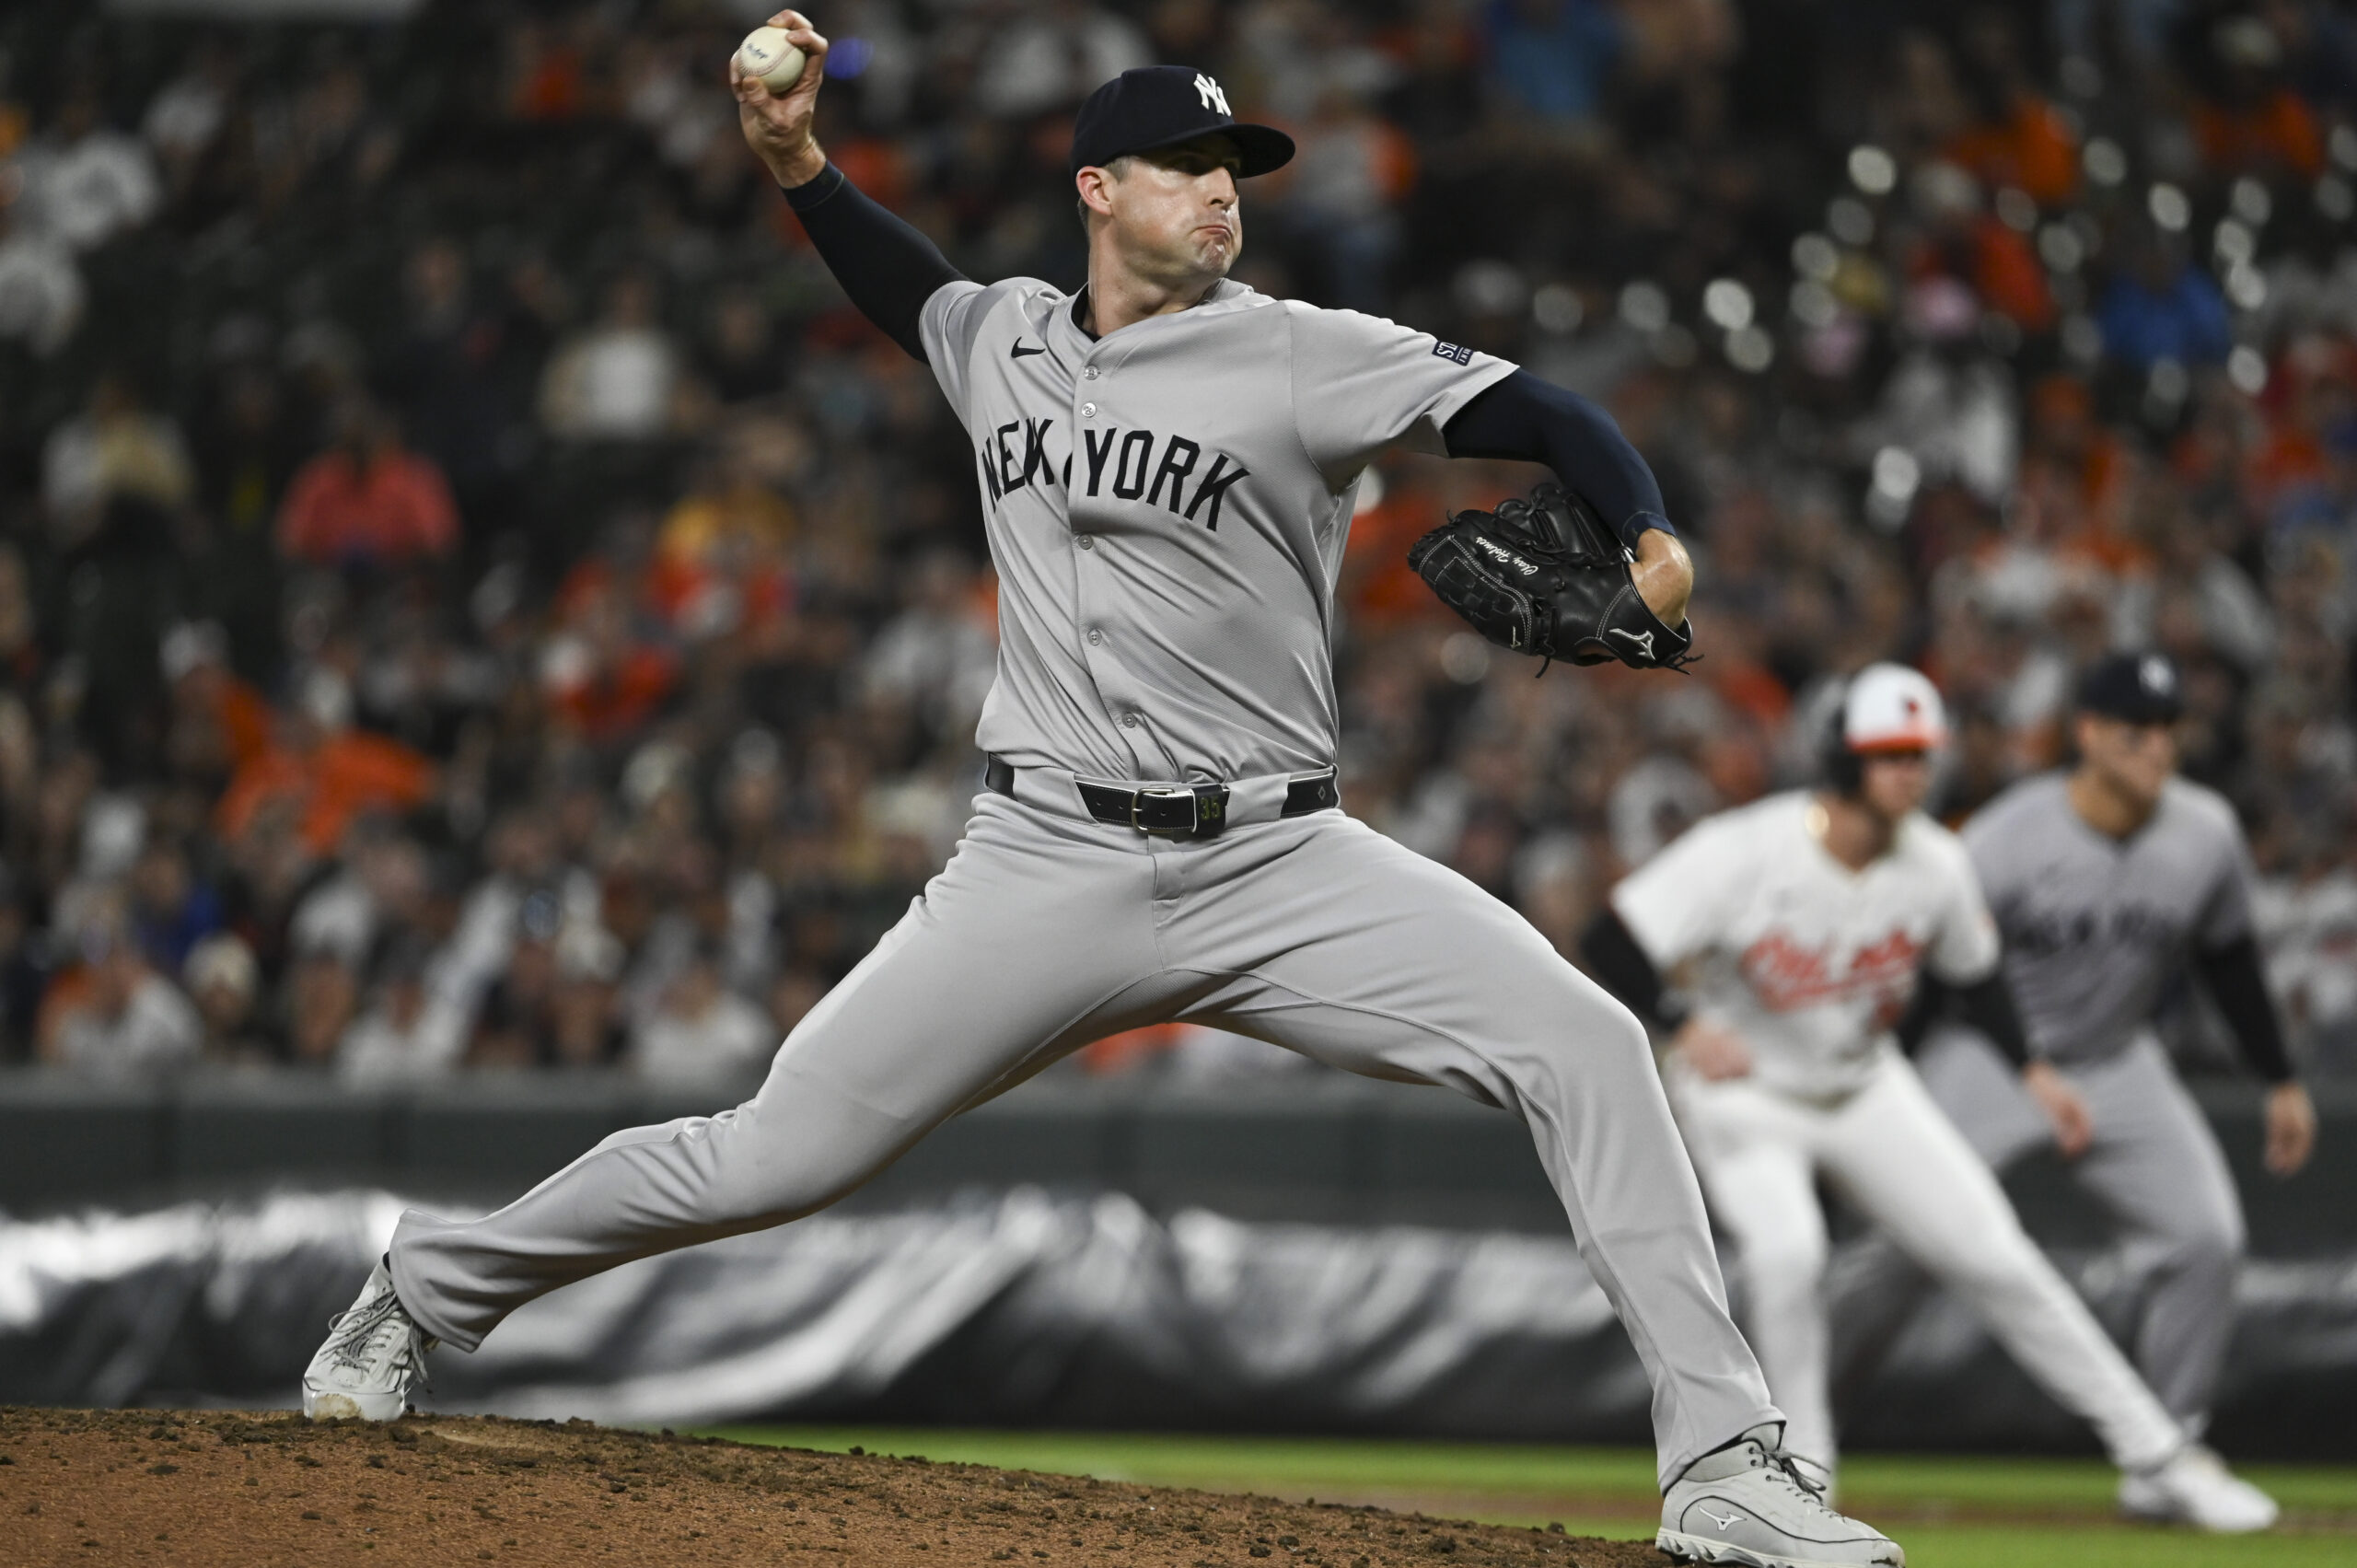 Breaking down the recent success of Yankees closer Clay Holmes